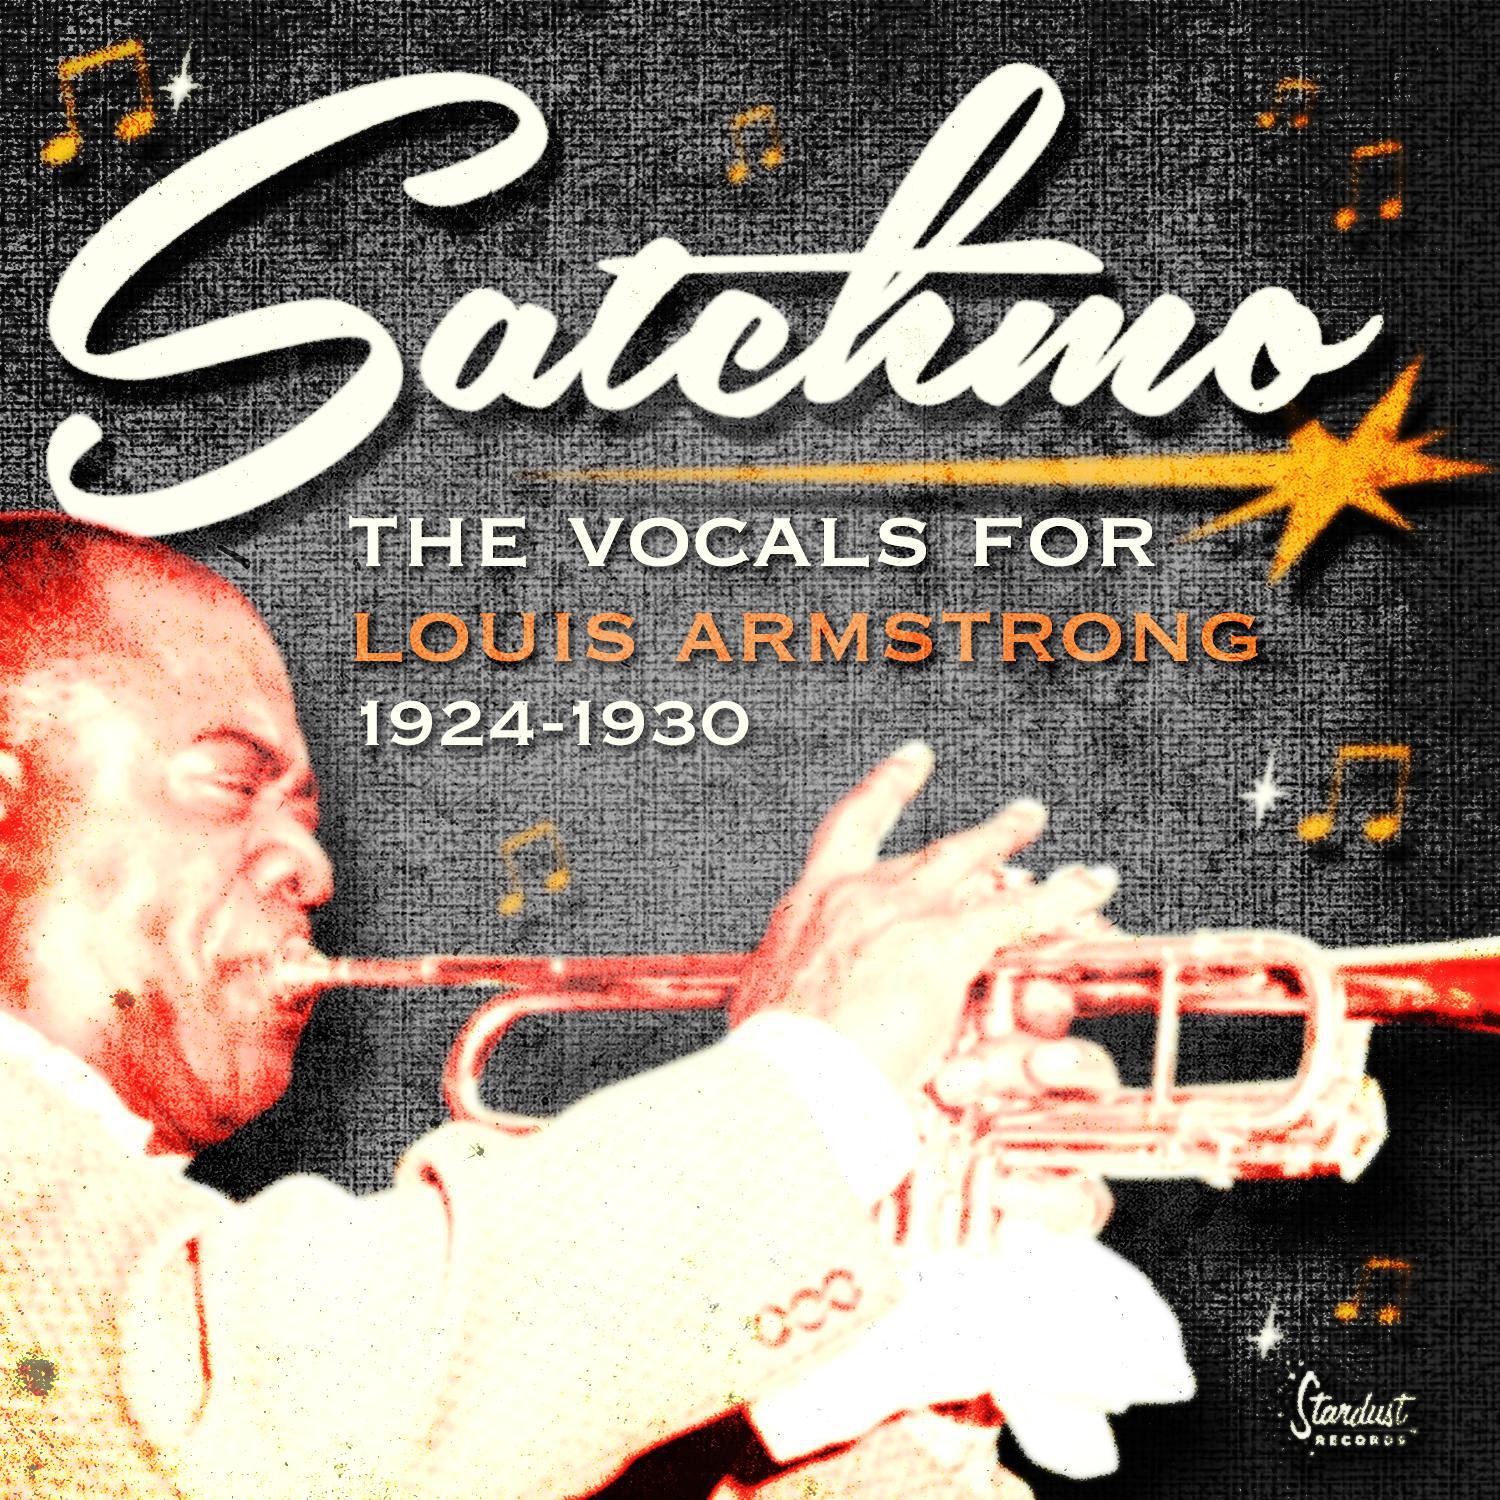 Satchmo - The Vocals for Louis Armstrong 1924-1930